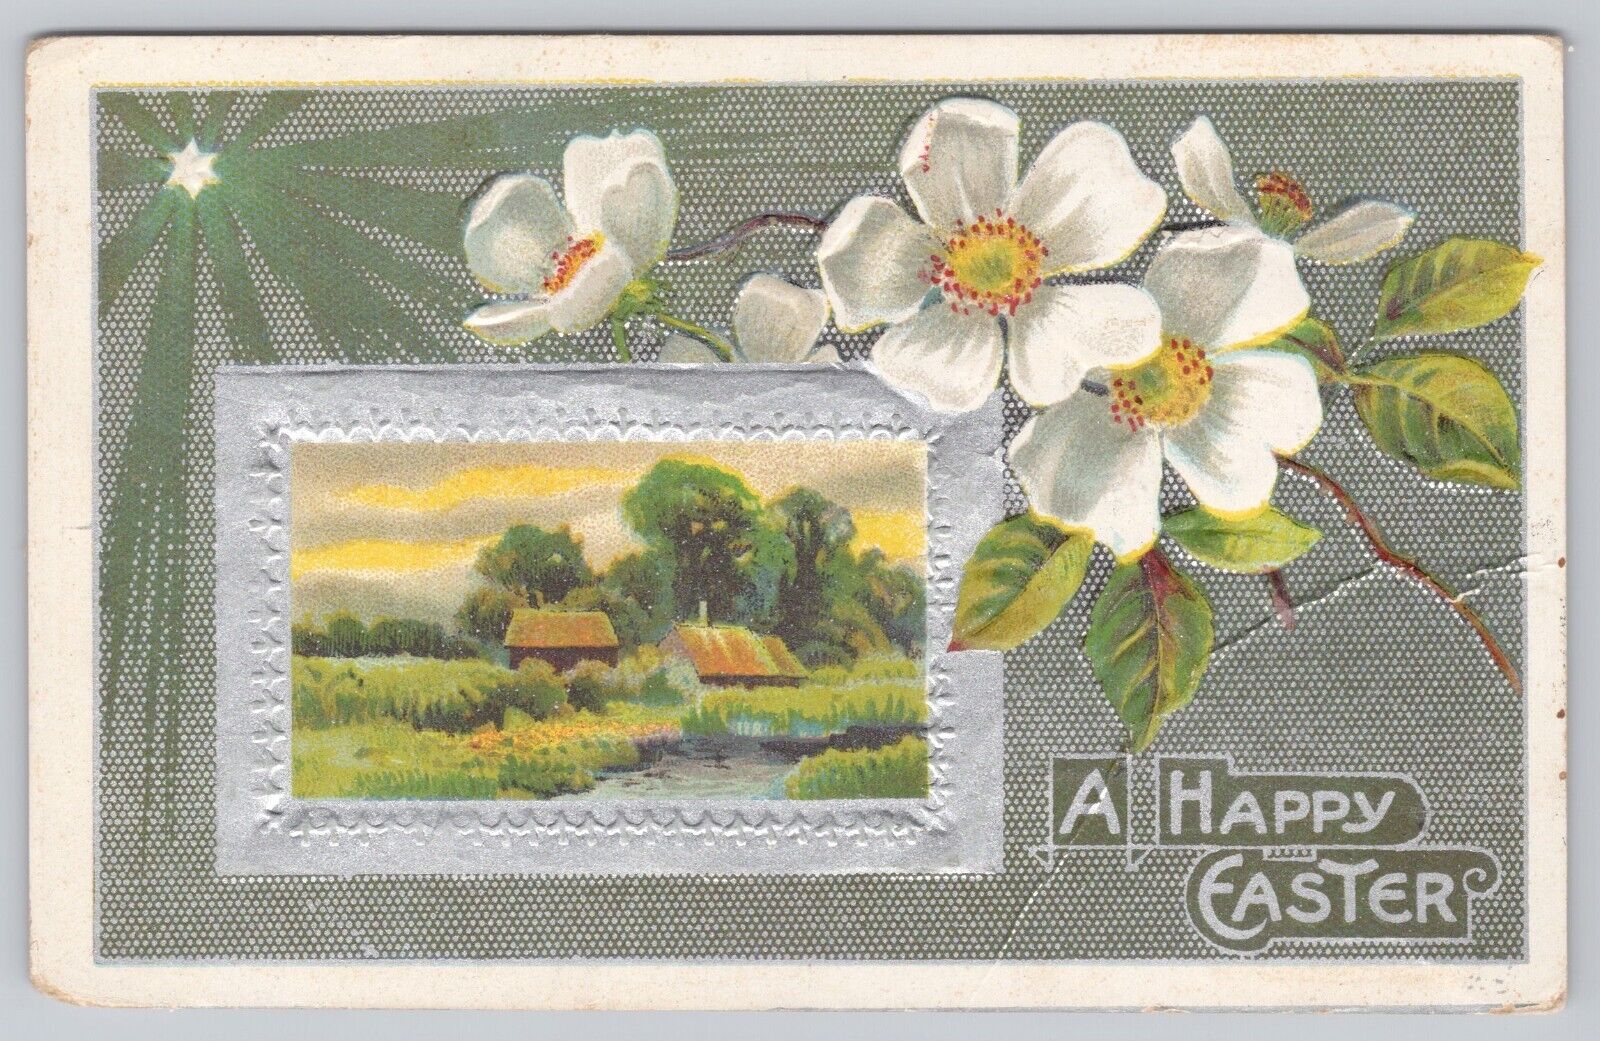 Sinclairville New York, Happy Easter White Flowers Country Cottage, VTG Postcard